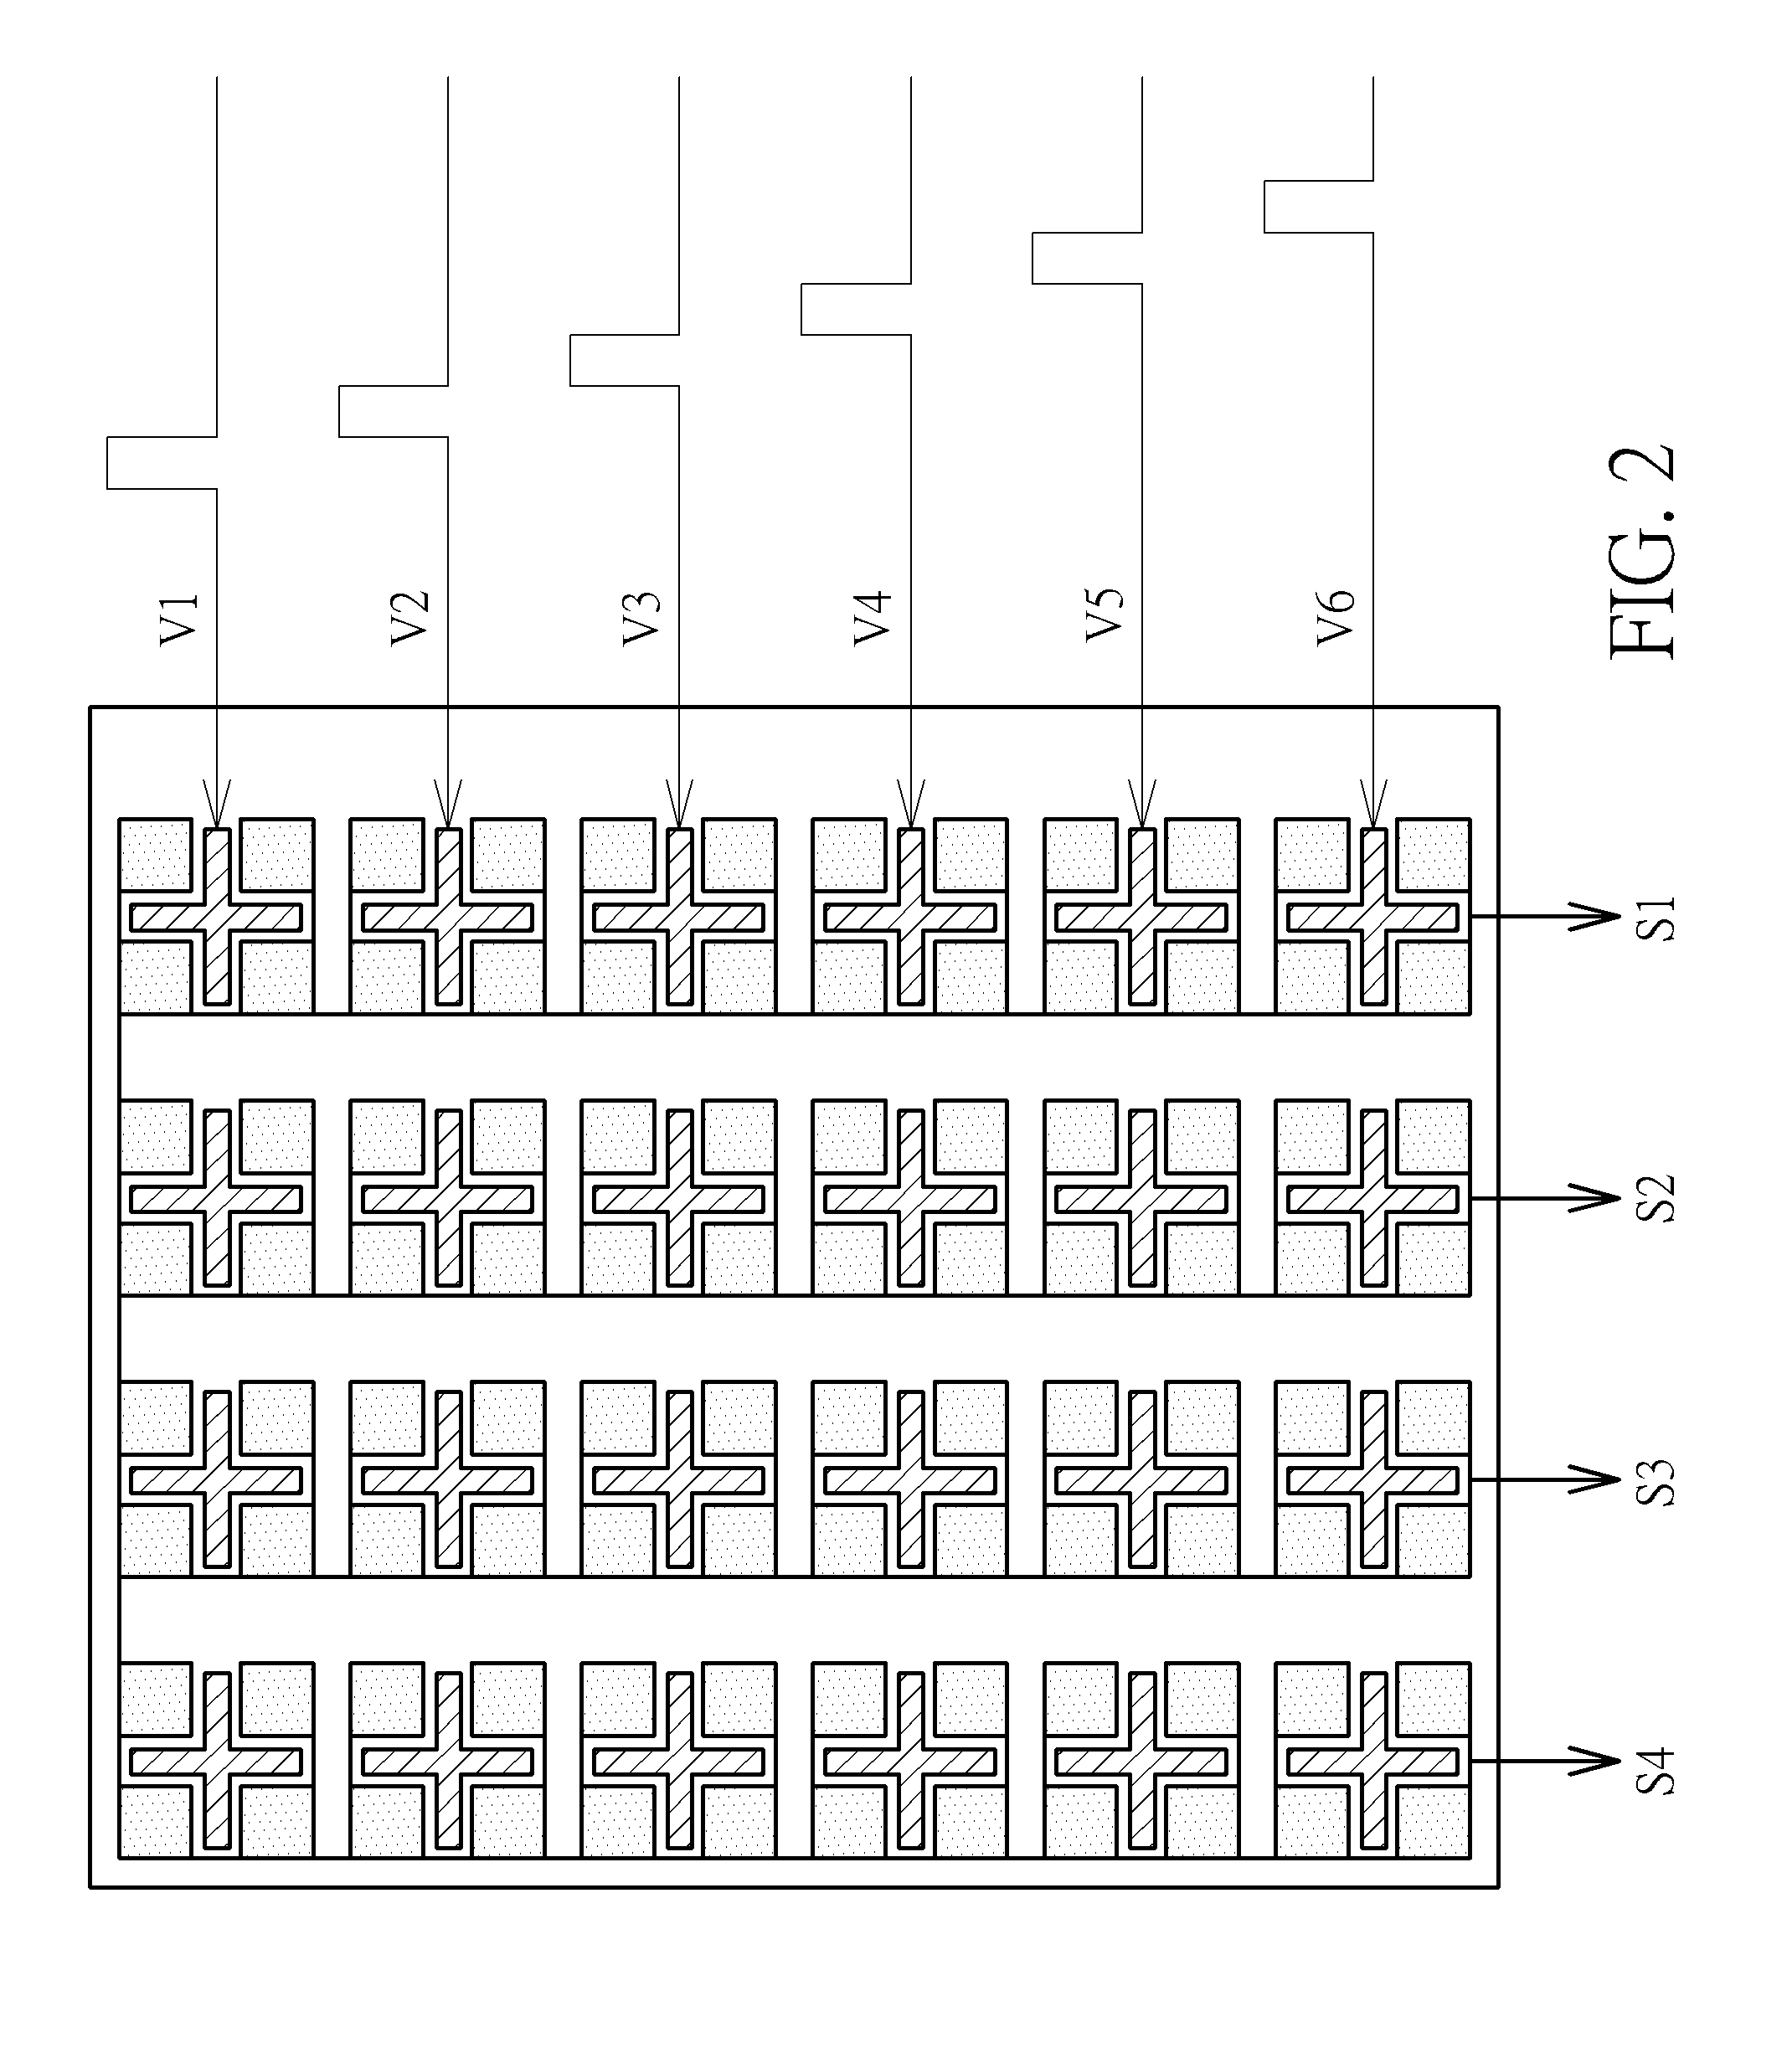 Driving and sensing method for single-layer mutual capacitive multi-touch screen